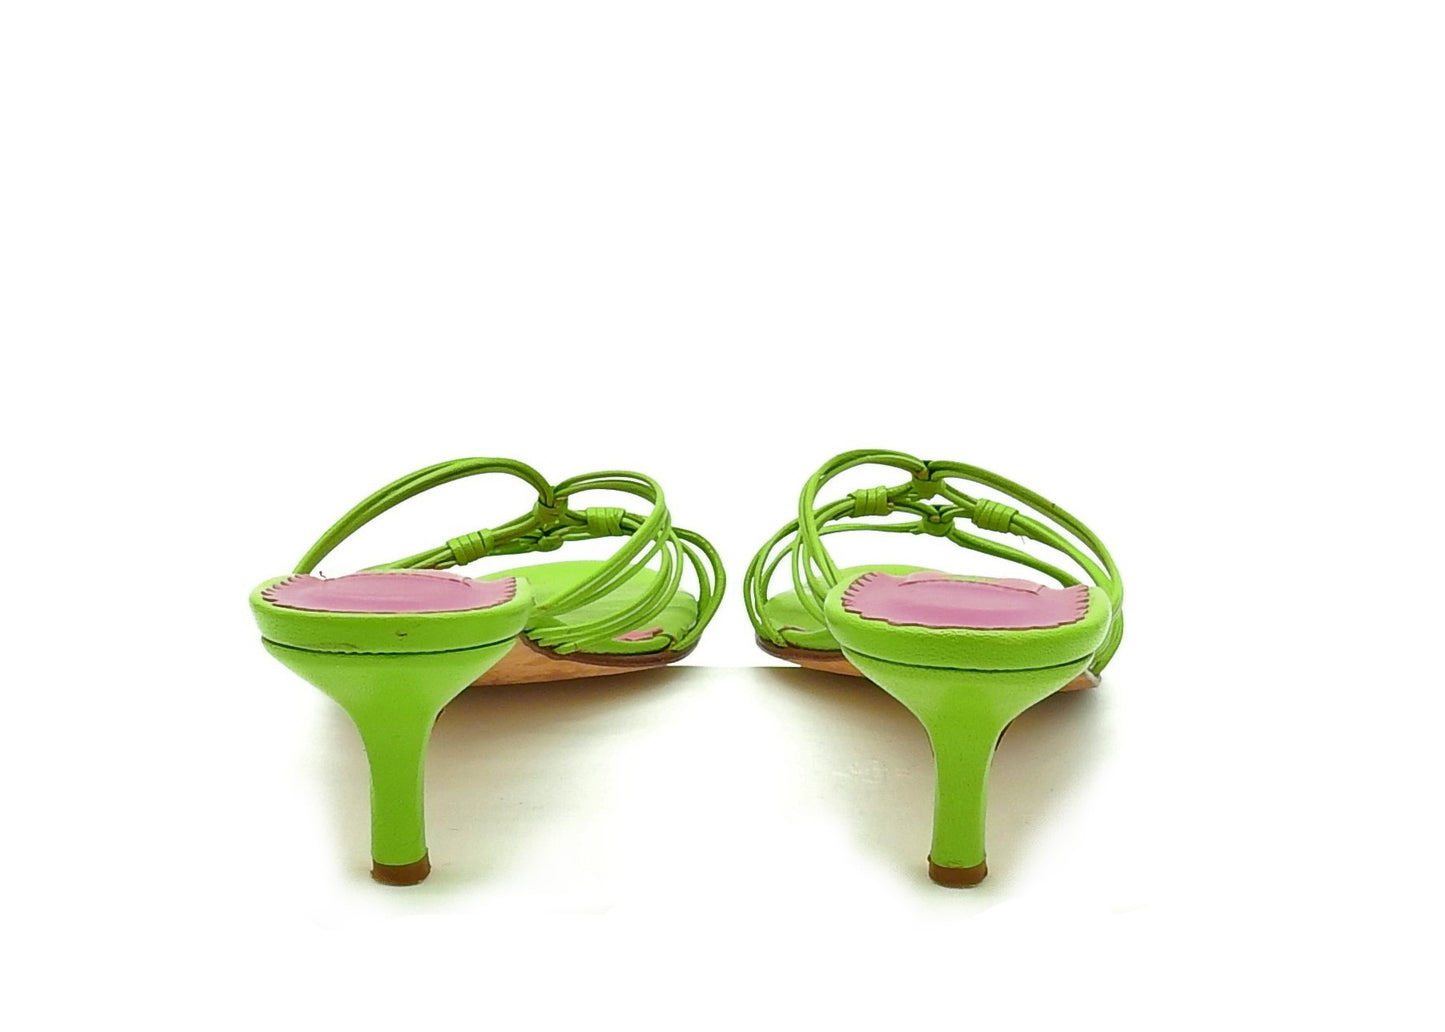 Bright Green Leather Mule <br /> Size: 9.5